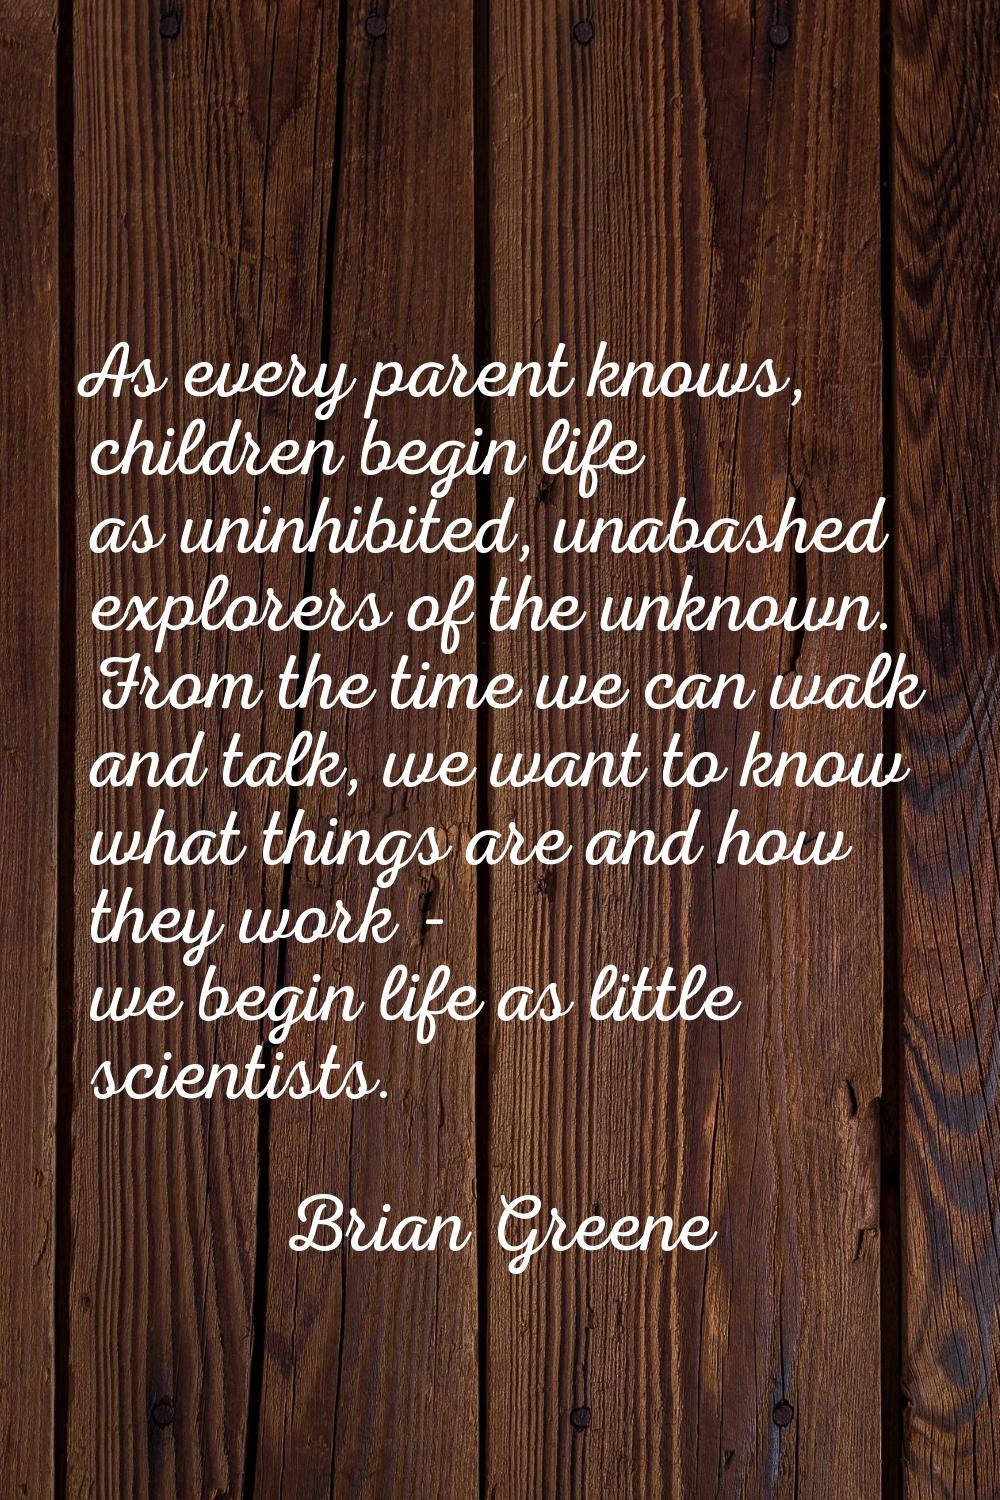 As every parent knows, children begin life as uninhibited, unabashed explorers of the unknown. From